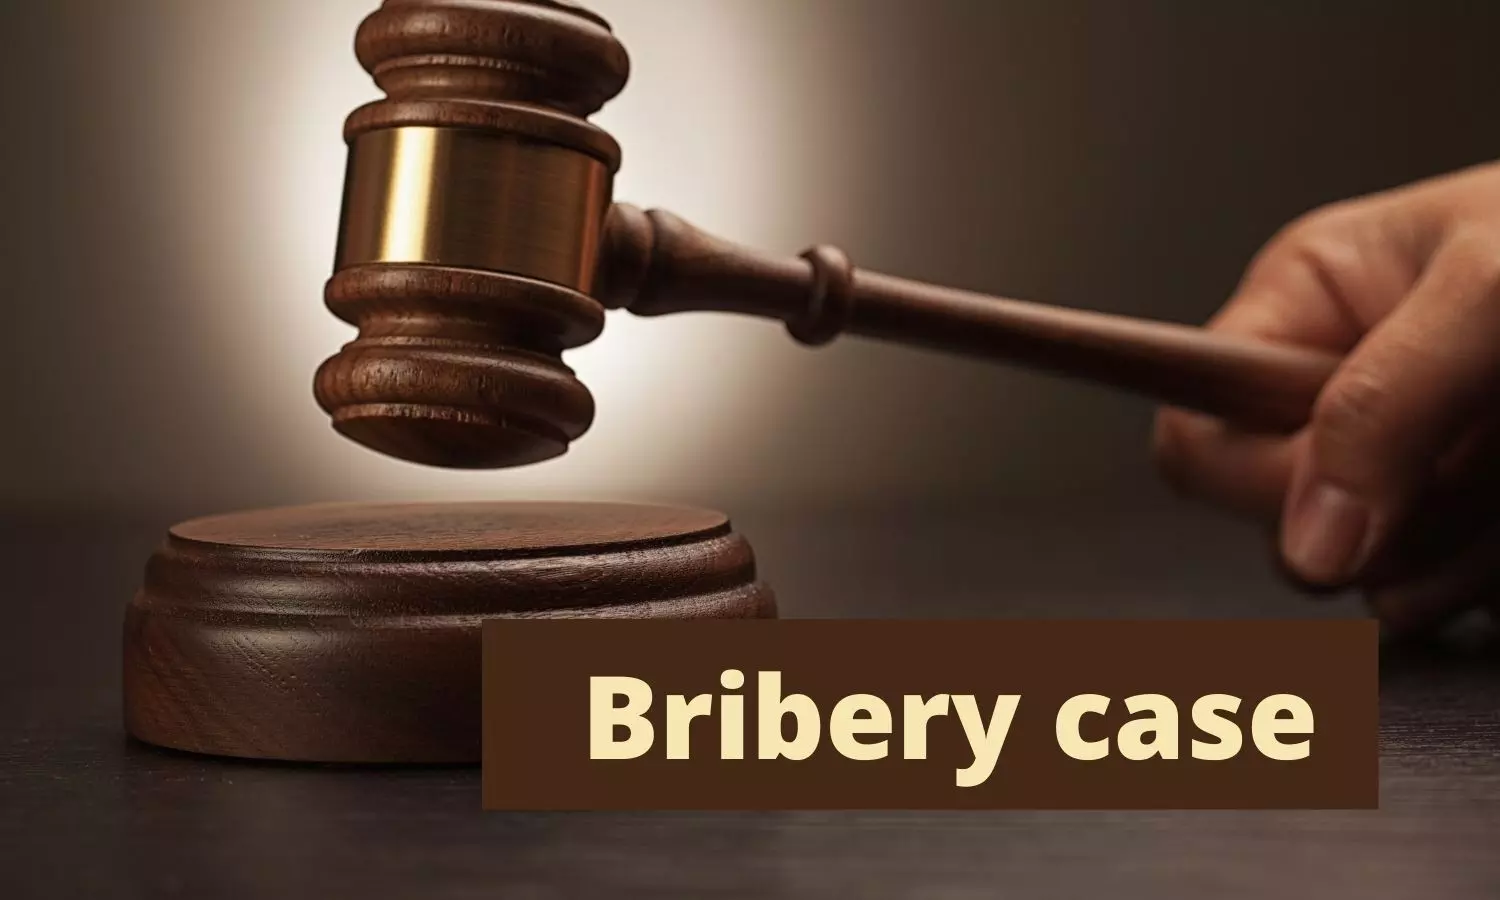 Bribery scandal: CBI approaches Delhi HC after special court denies custody of Joint drugs controller, Biocon Biologics official